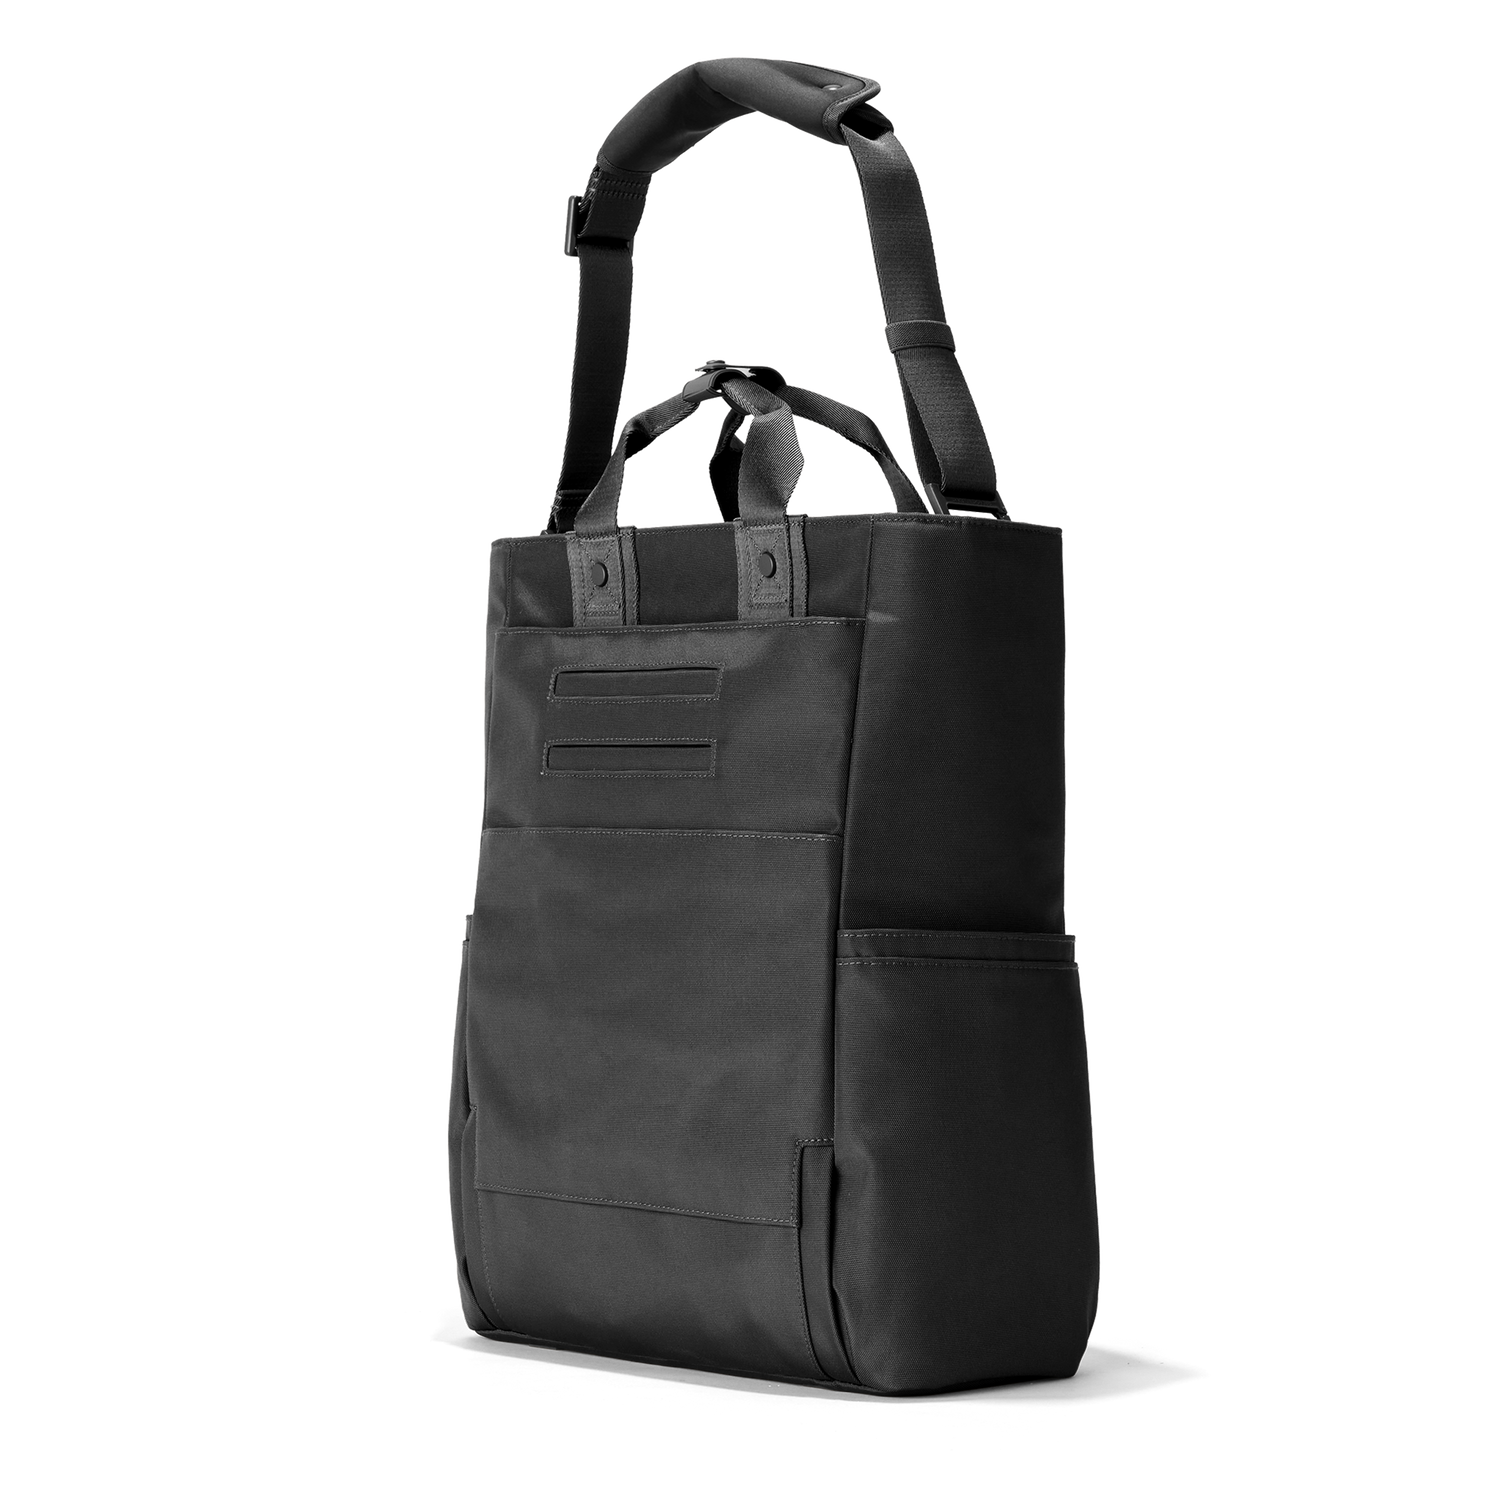 Black Backpack Tote - Petra Convertible Tote | Dagne Dover